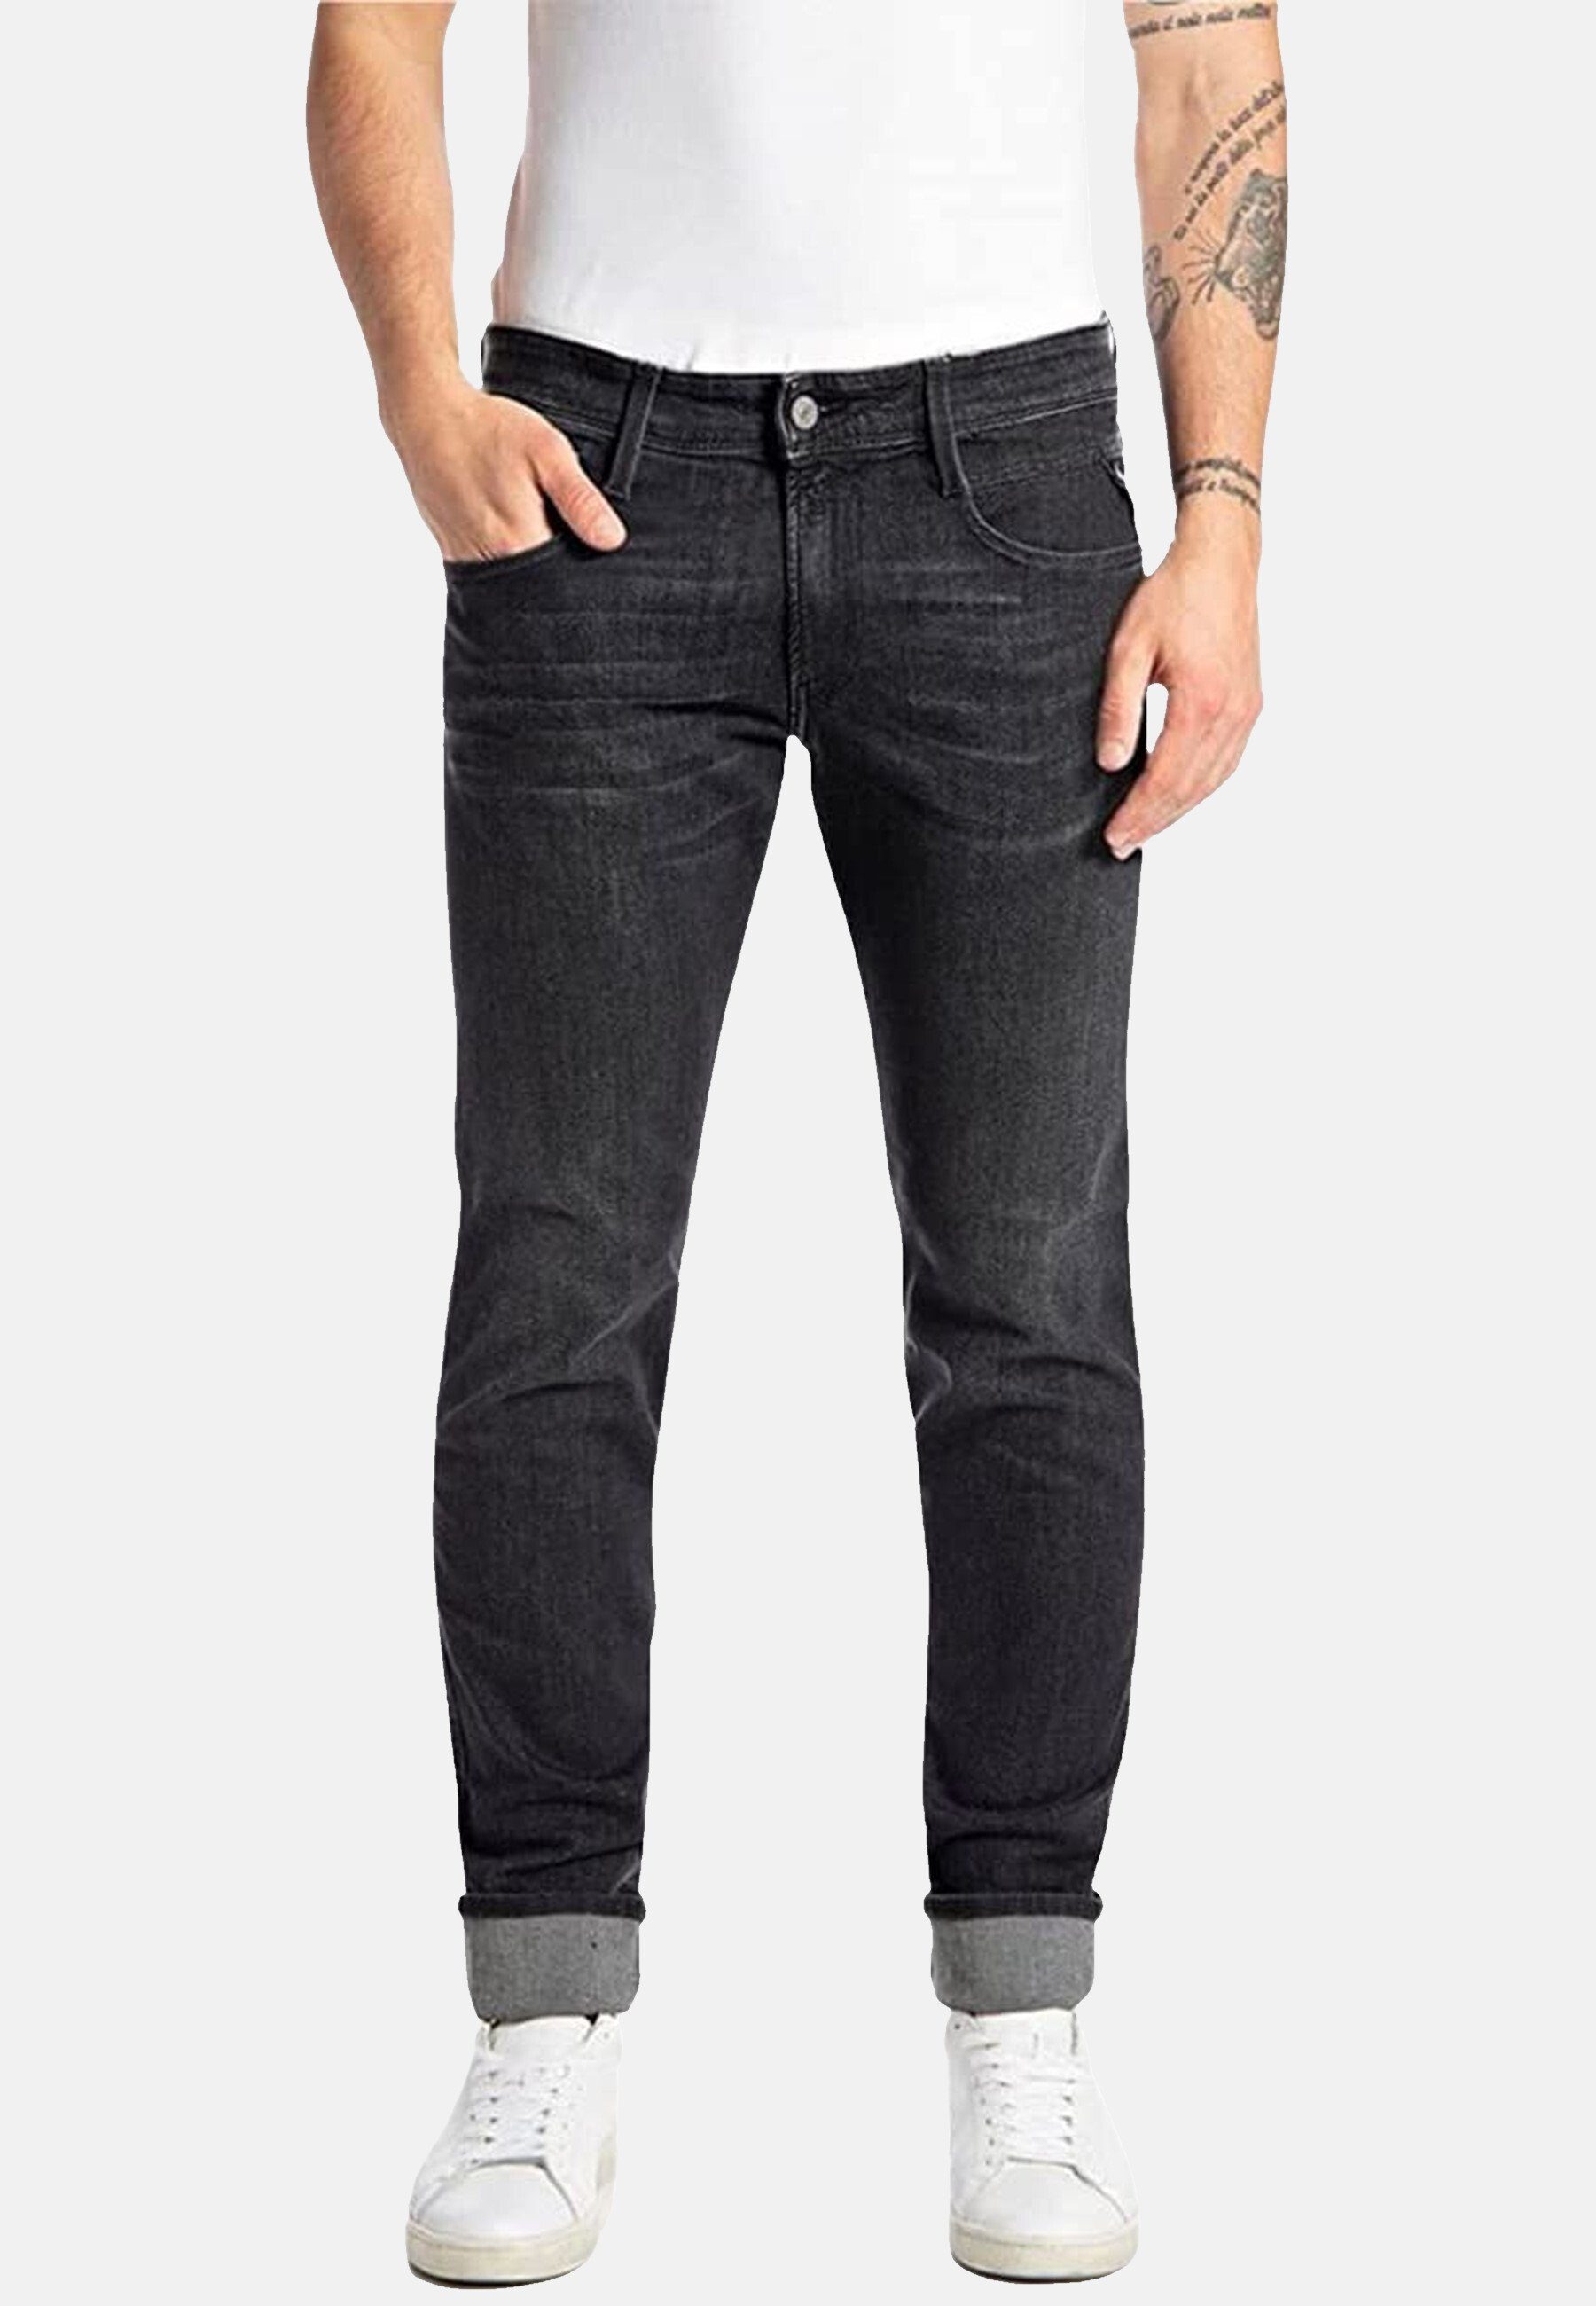 Replay 5-Pocket-Jeans Jeans Anbass 5-Pocket-Style Hose